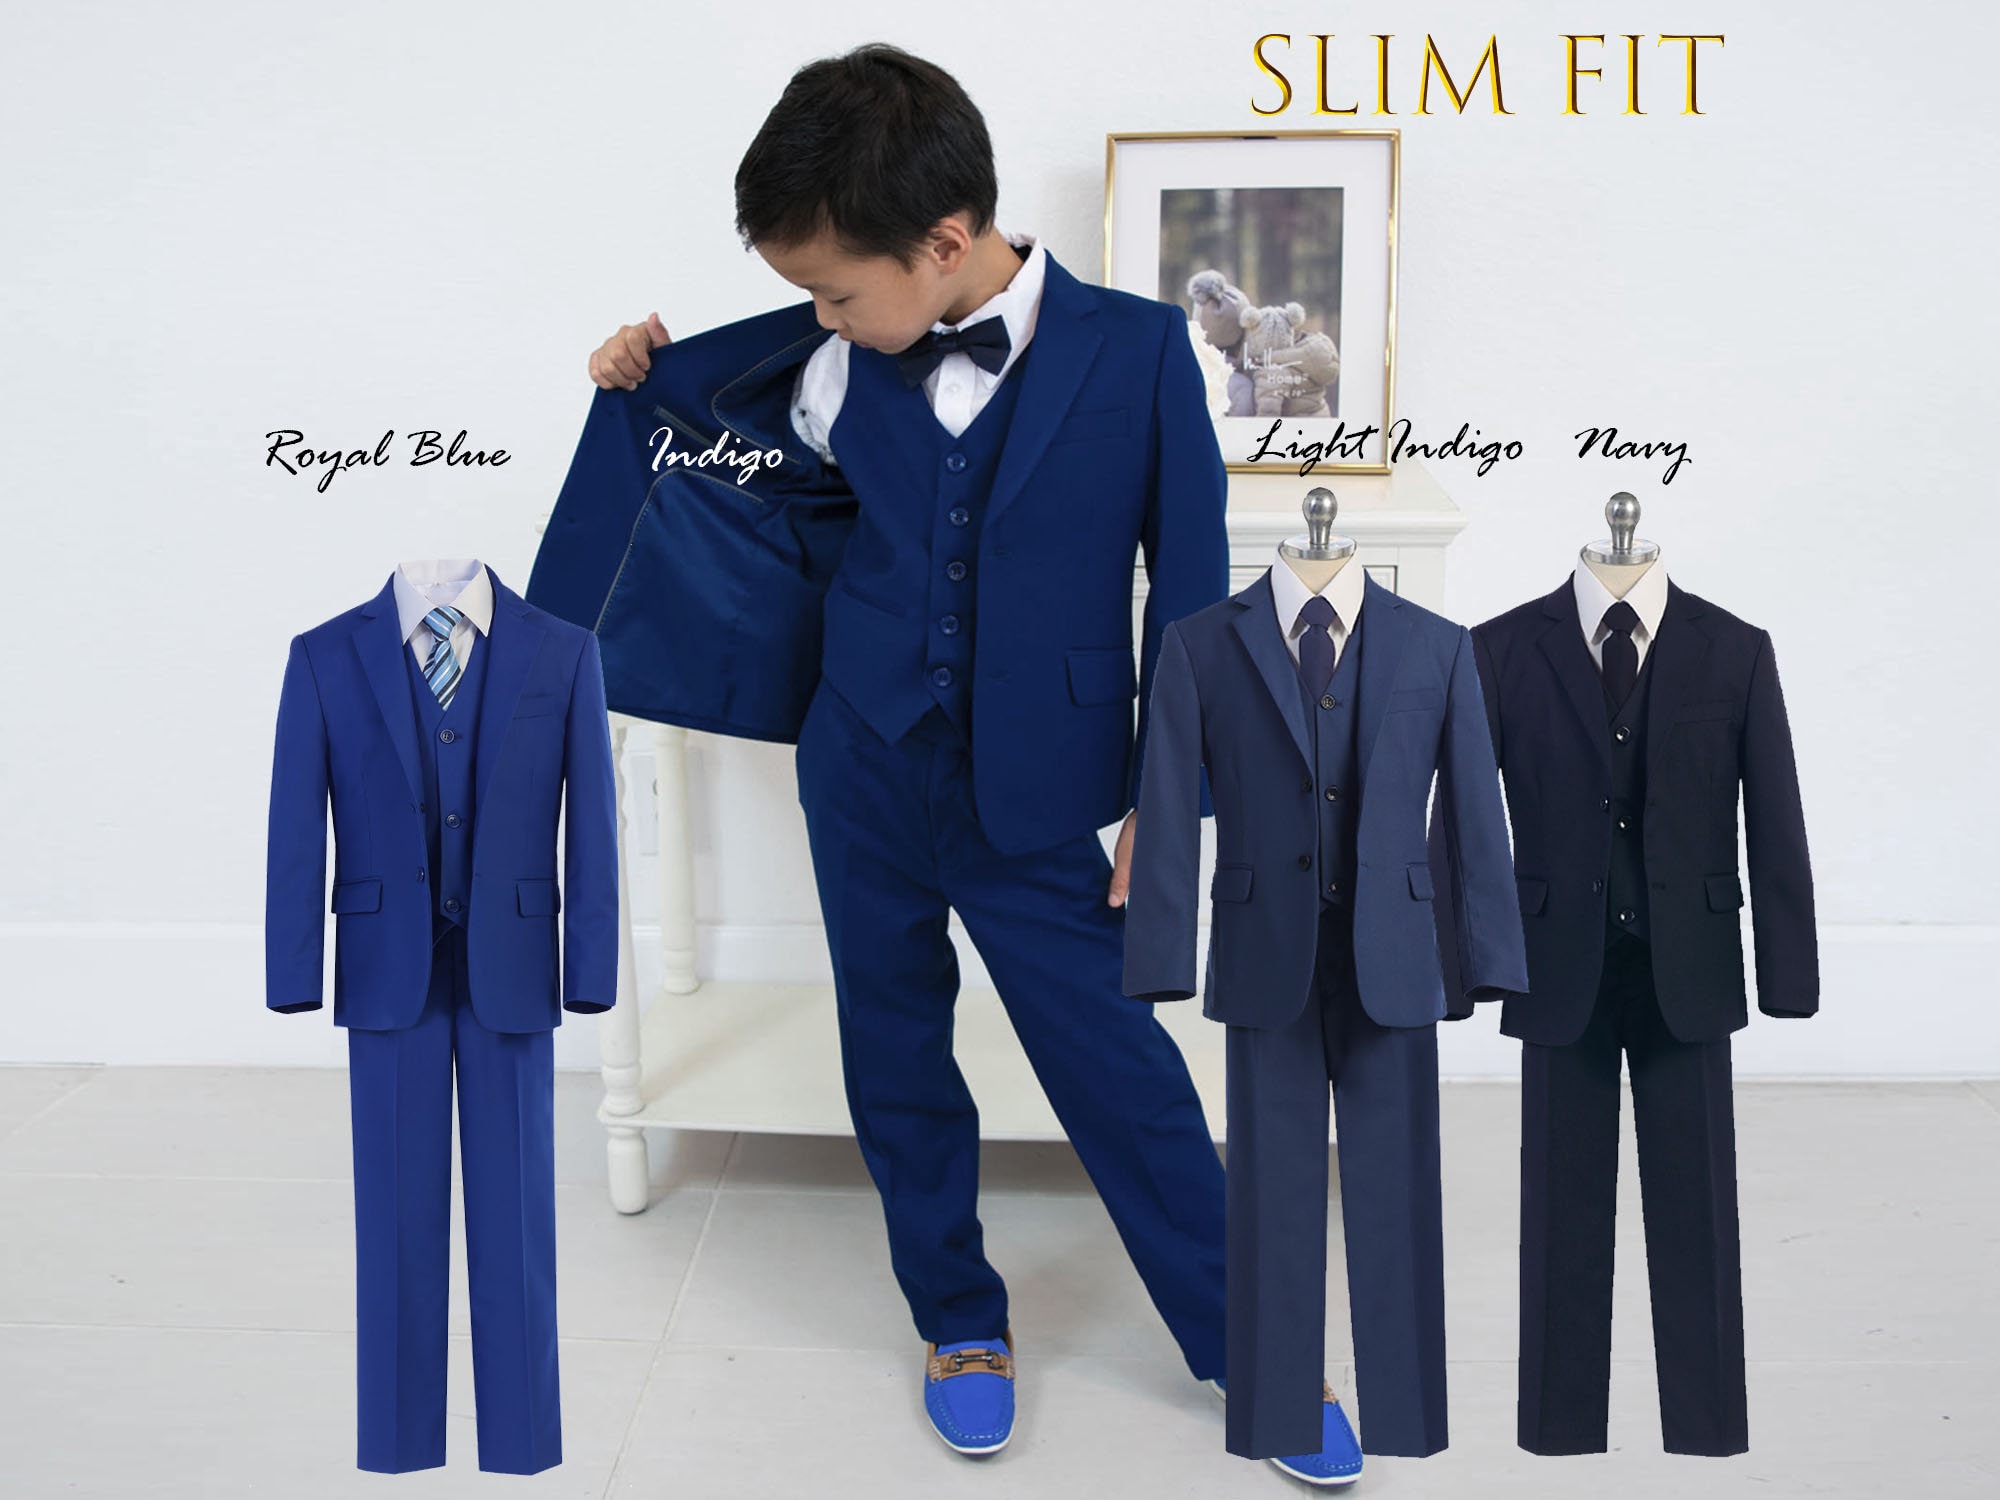 Navy Blue Three-piece Suit for Men Formal Event Attire for Every Occasion  Tailored Fit, the Rising Sun Store, Vardo 